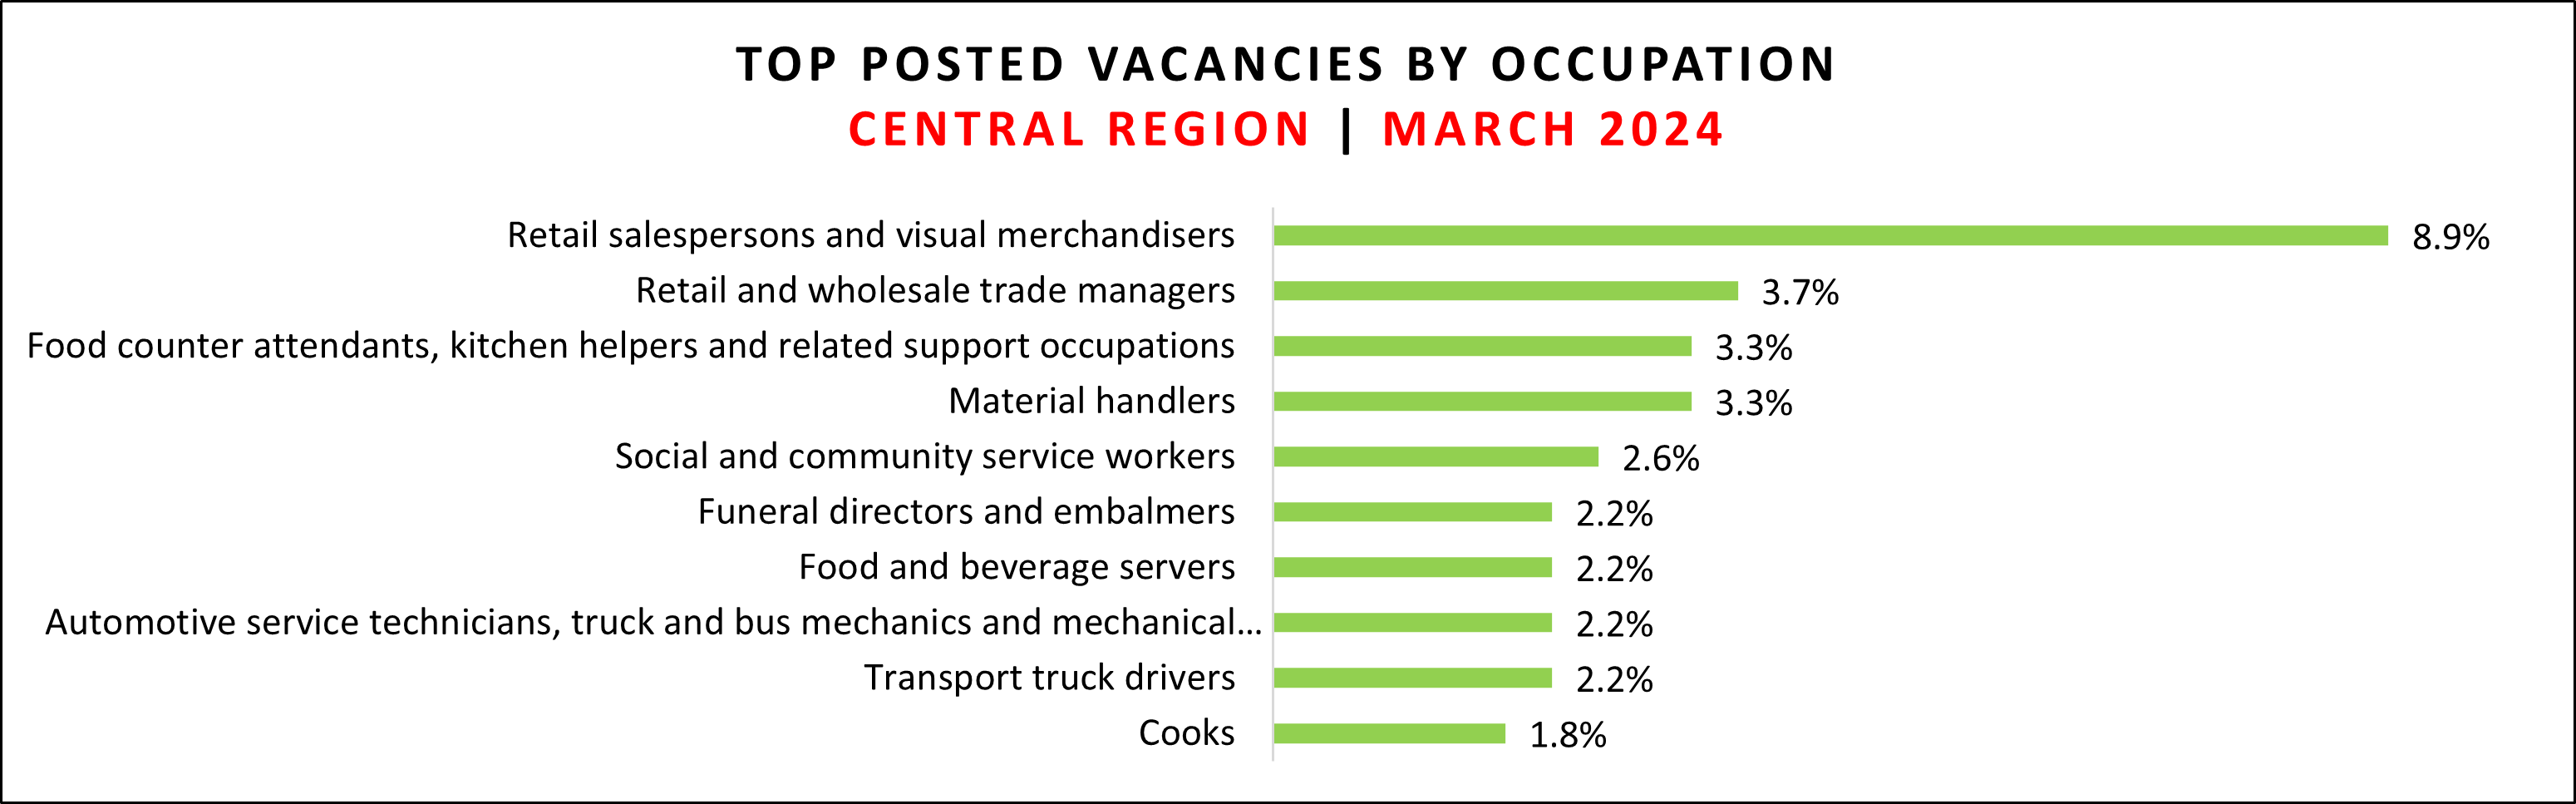 Jab vacancy data for Central region in March 2024.